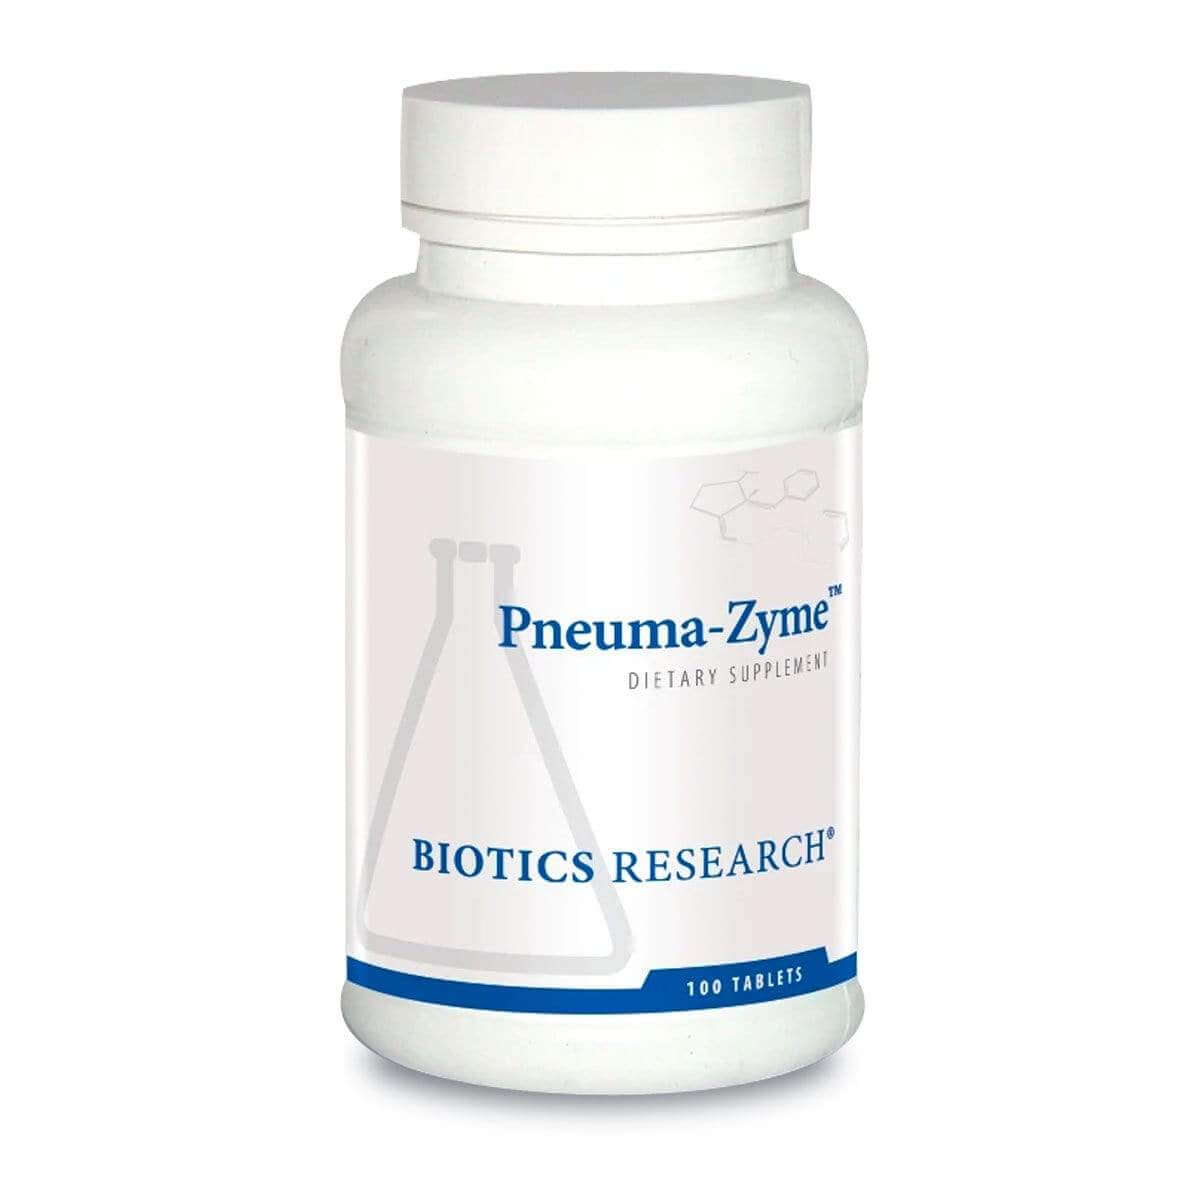 Pneuma-Zyme - 100 tablets Biotics Research Supplement - Conners Clinic